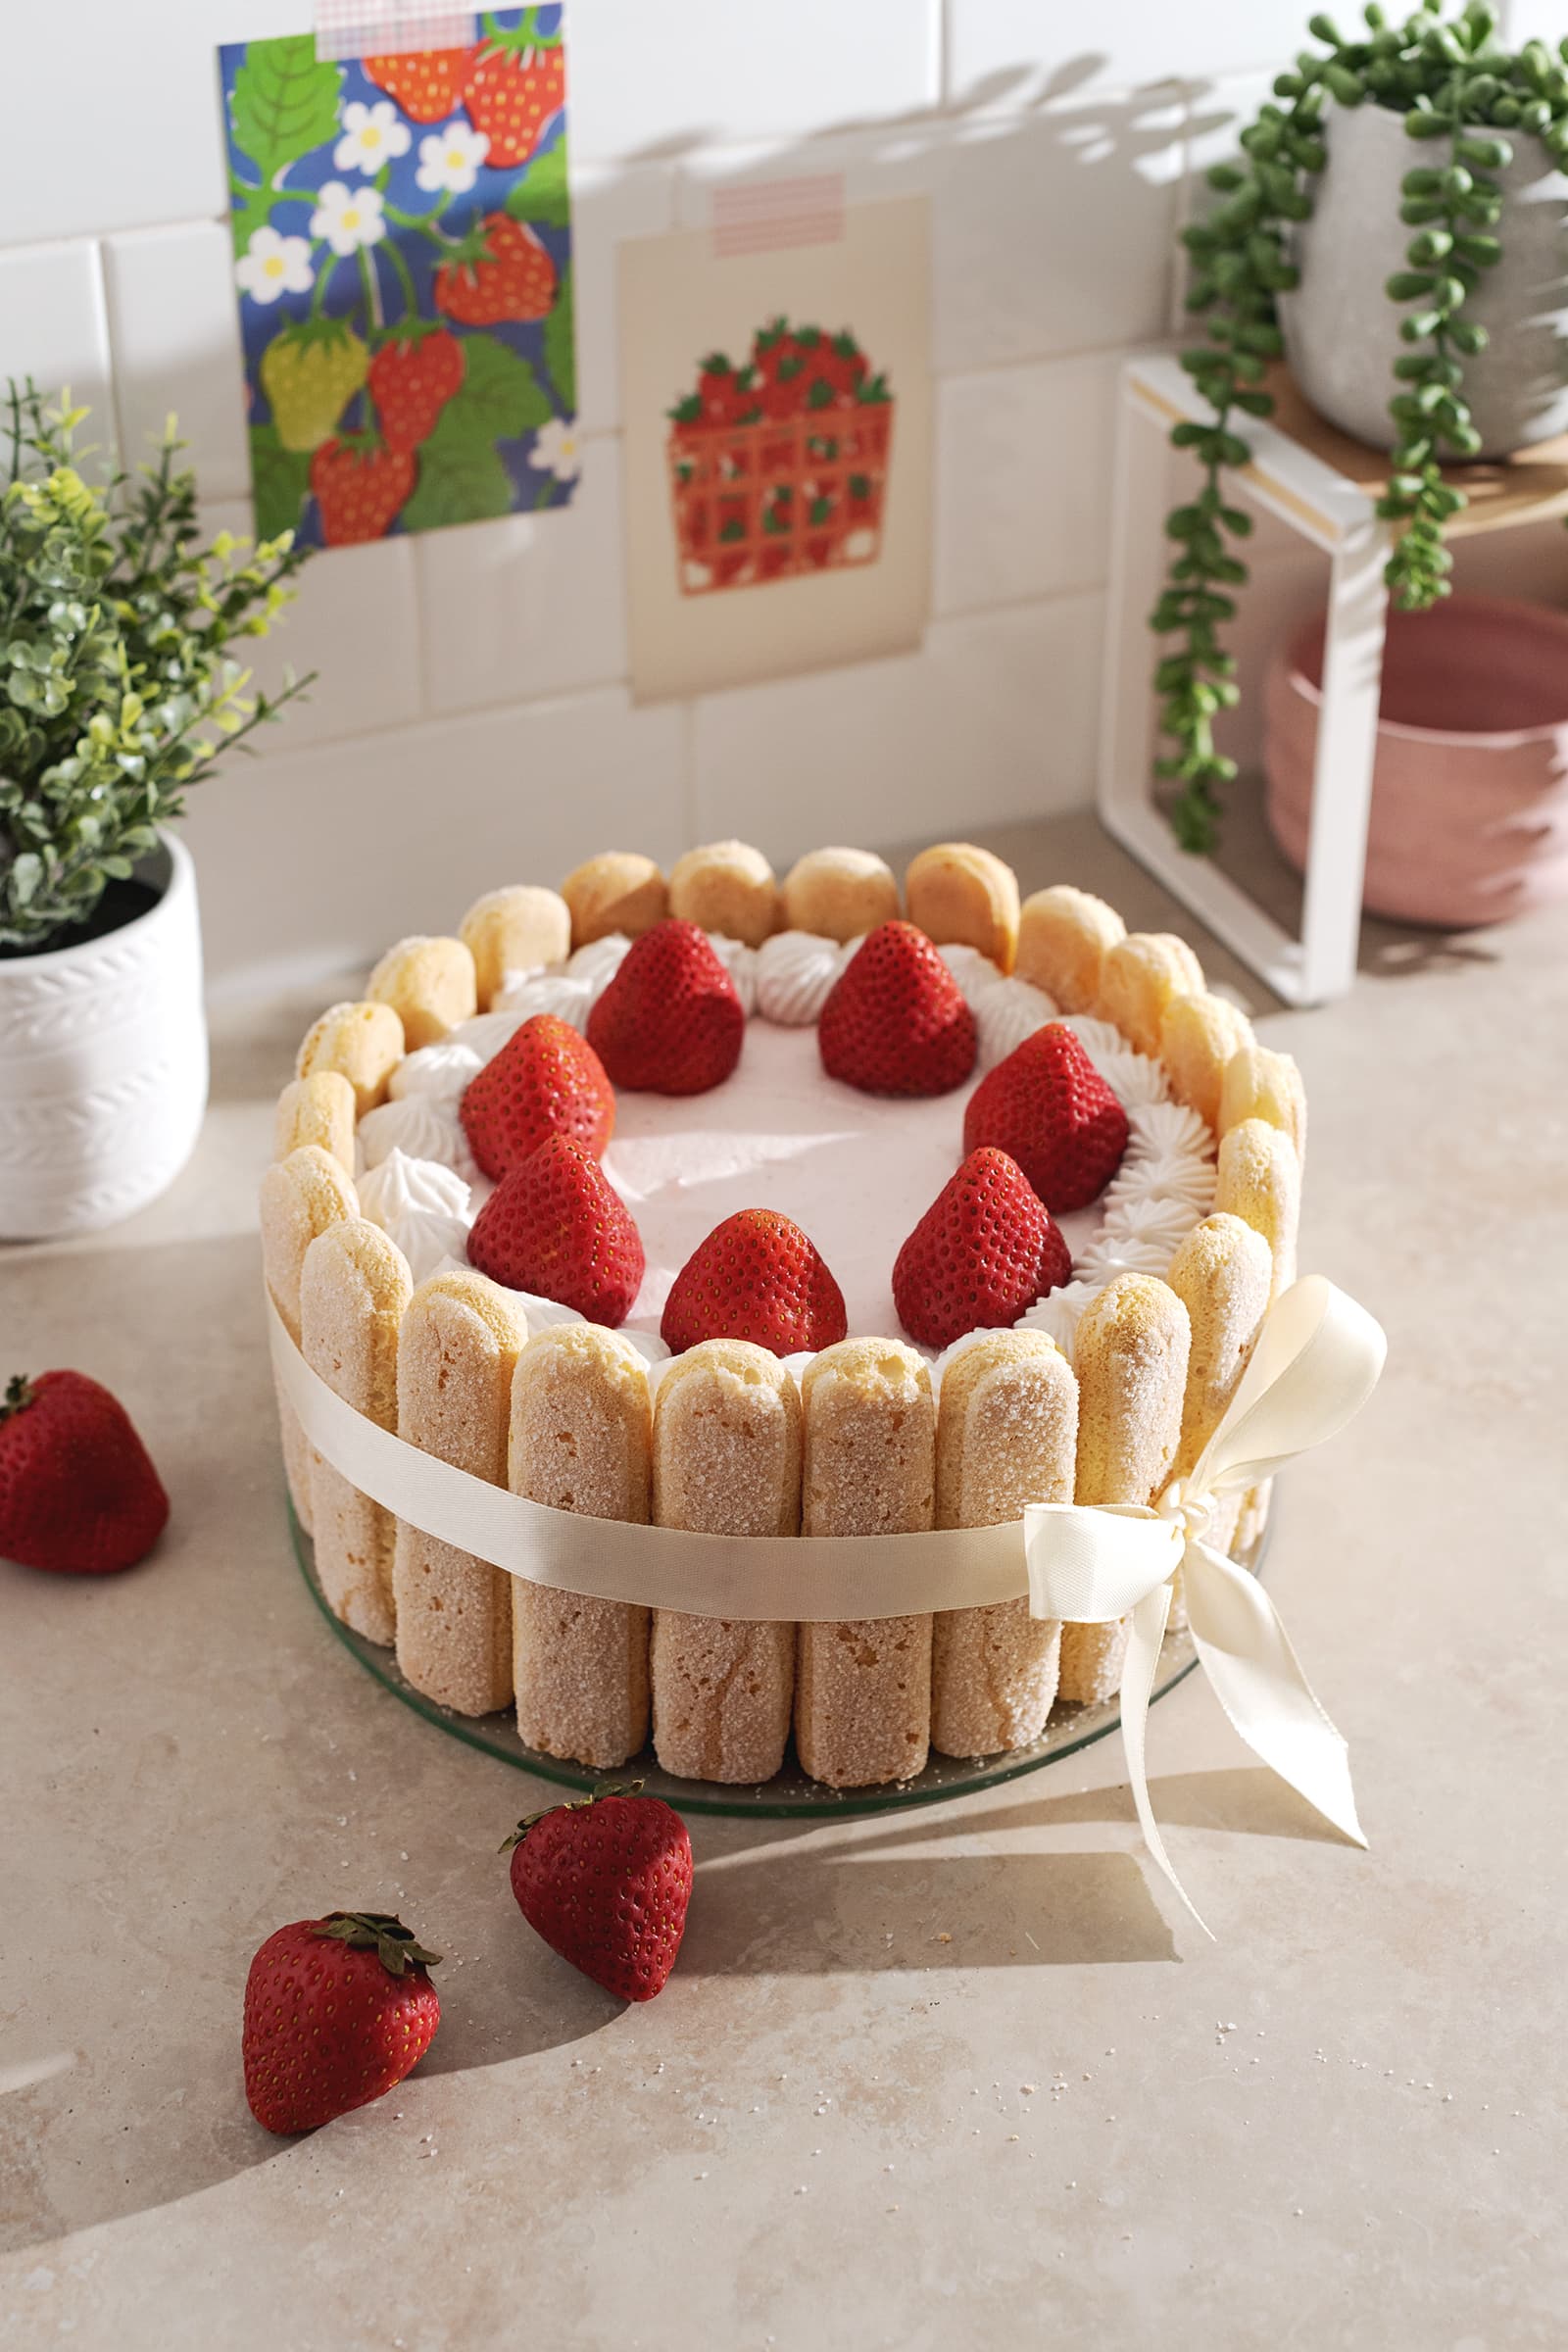 A strawberry charlotte cake wrapped in a ribbon on a counter with strawberries scattered around it.